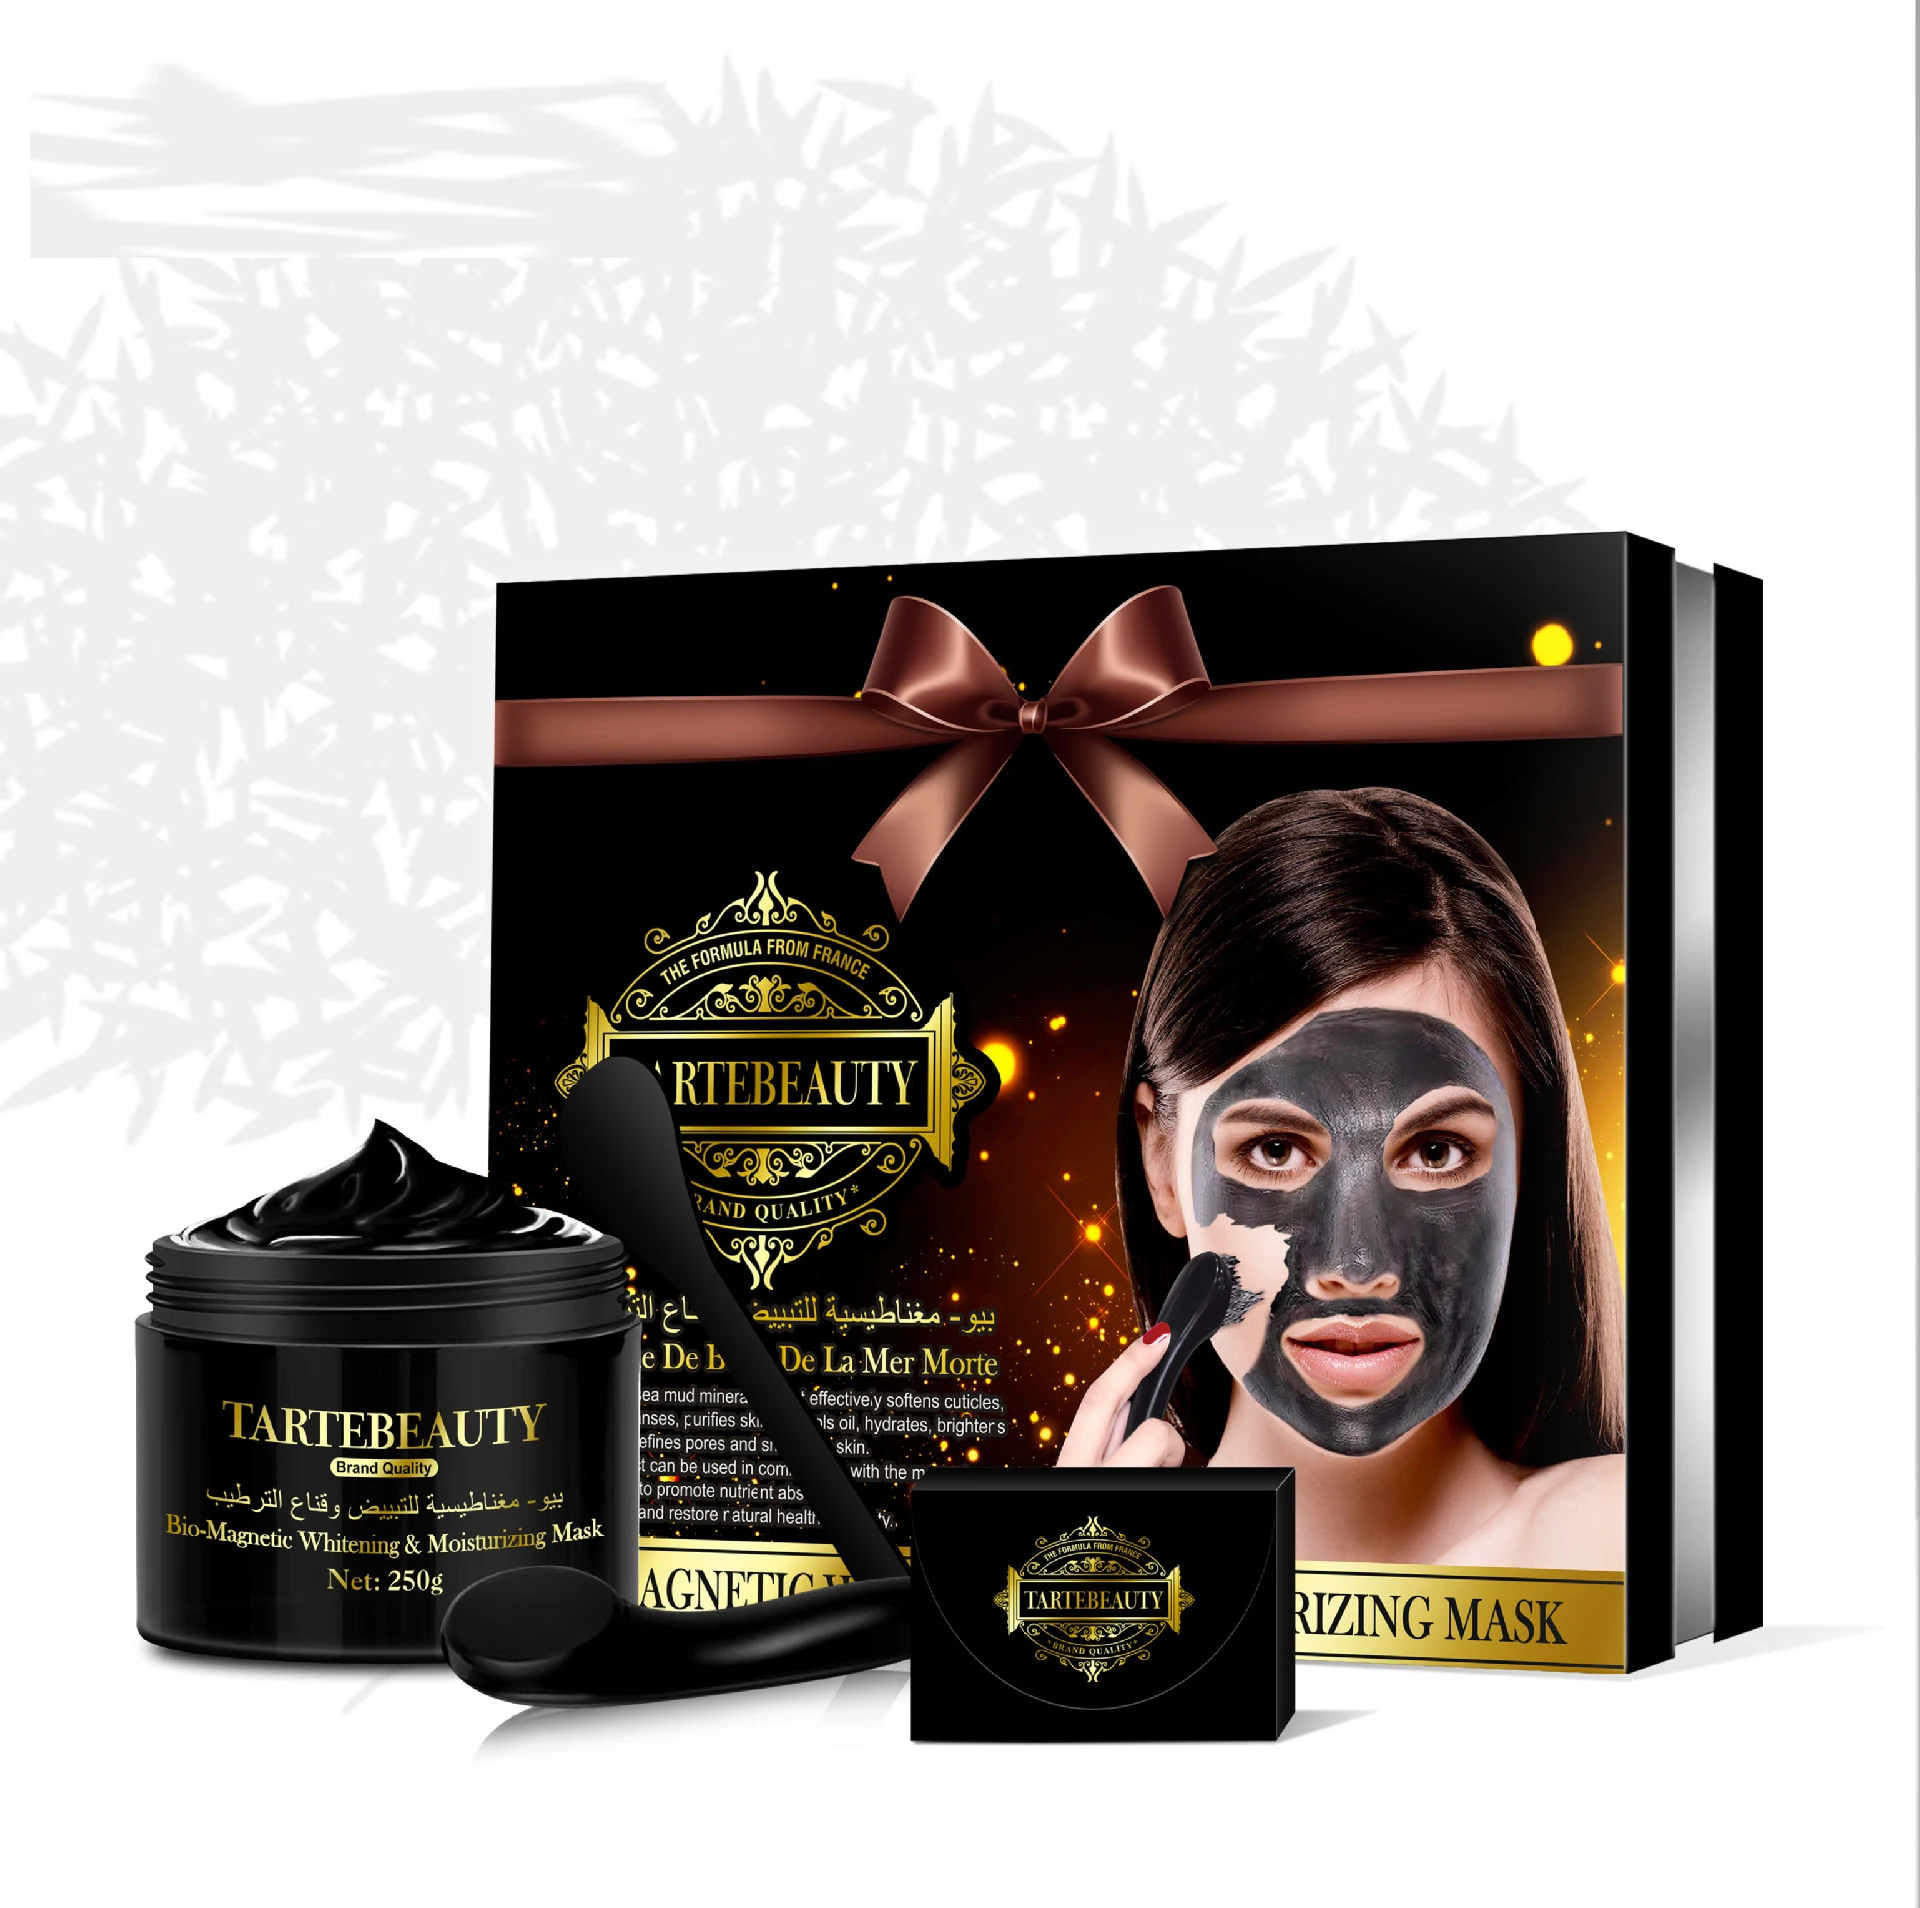 

250g bio-magnetic whitening & moisturizing mask mask for face Skin care beauty products skin care products